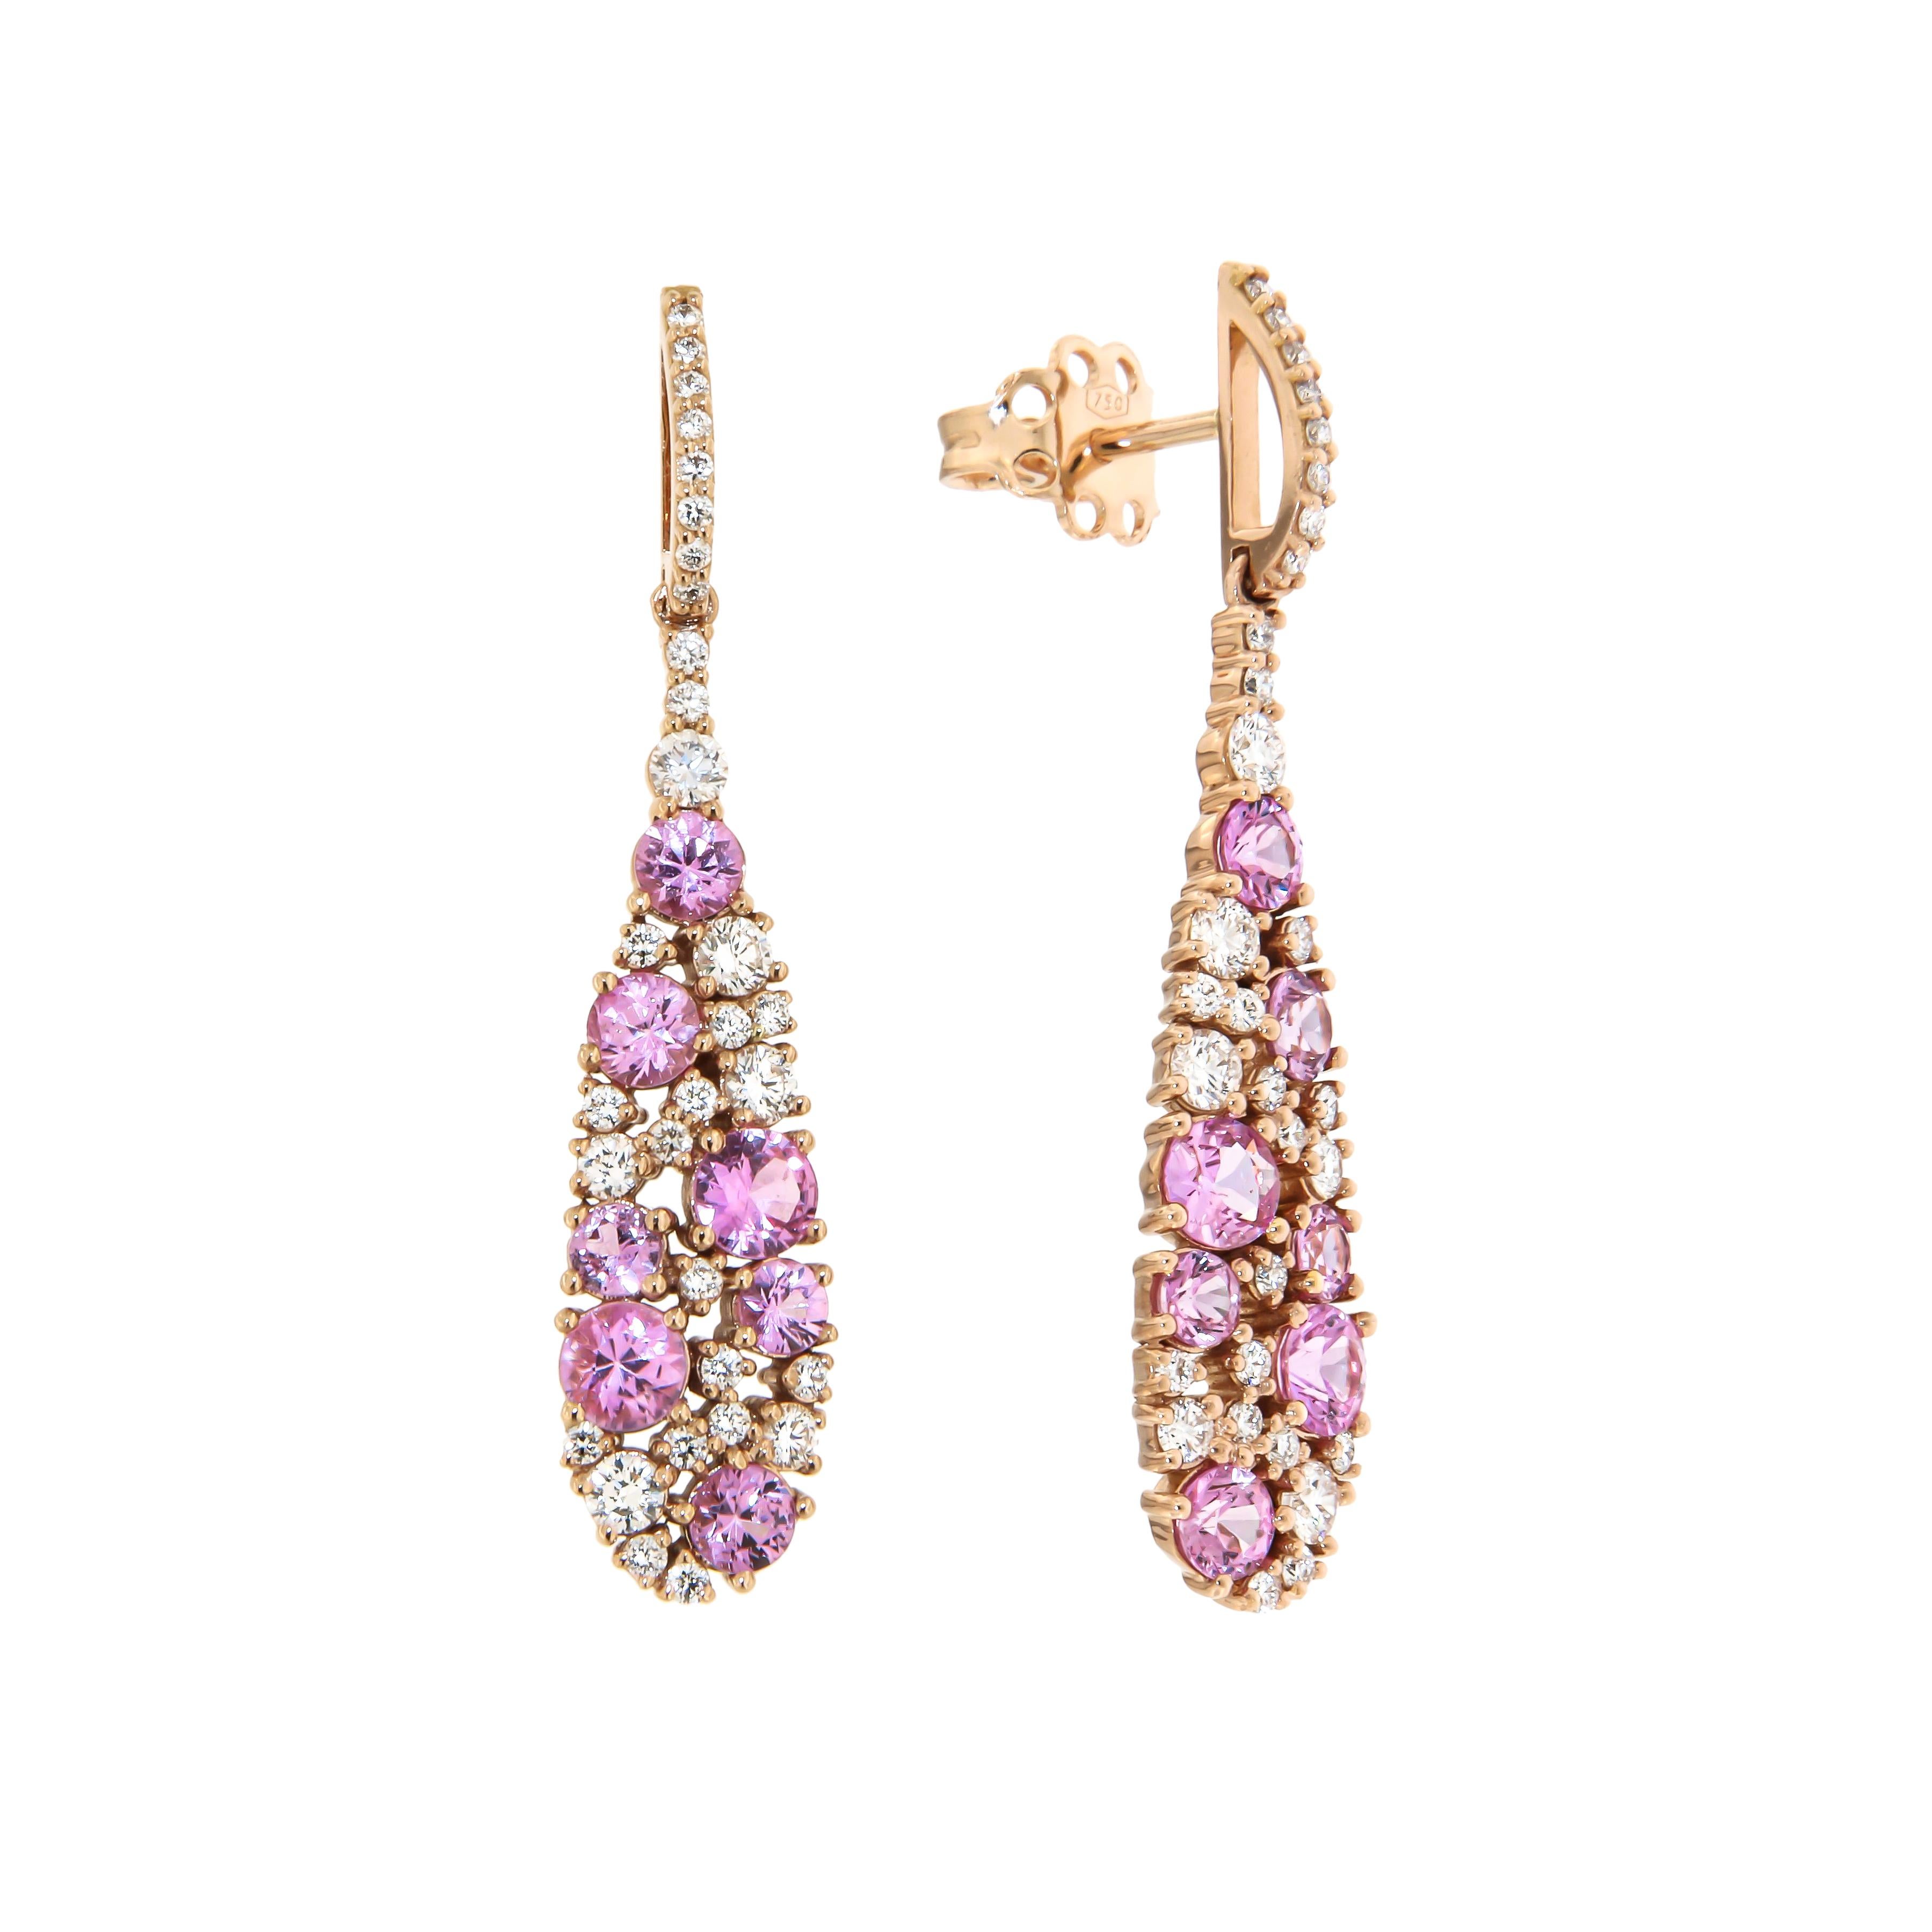 Earrings Rose 18K Gold (Earrings Same Style With Emeralds Available)

Diamond 0,93 ct
Pink Sapphire

Weight 7.20

It is our honour to create fine jewelry, and it’s for that reason that we choose to only work with high-quality, enduring materials